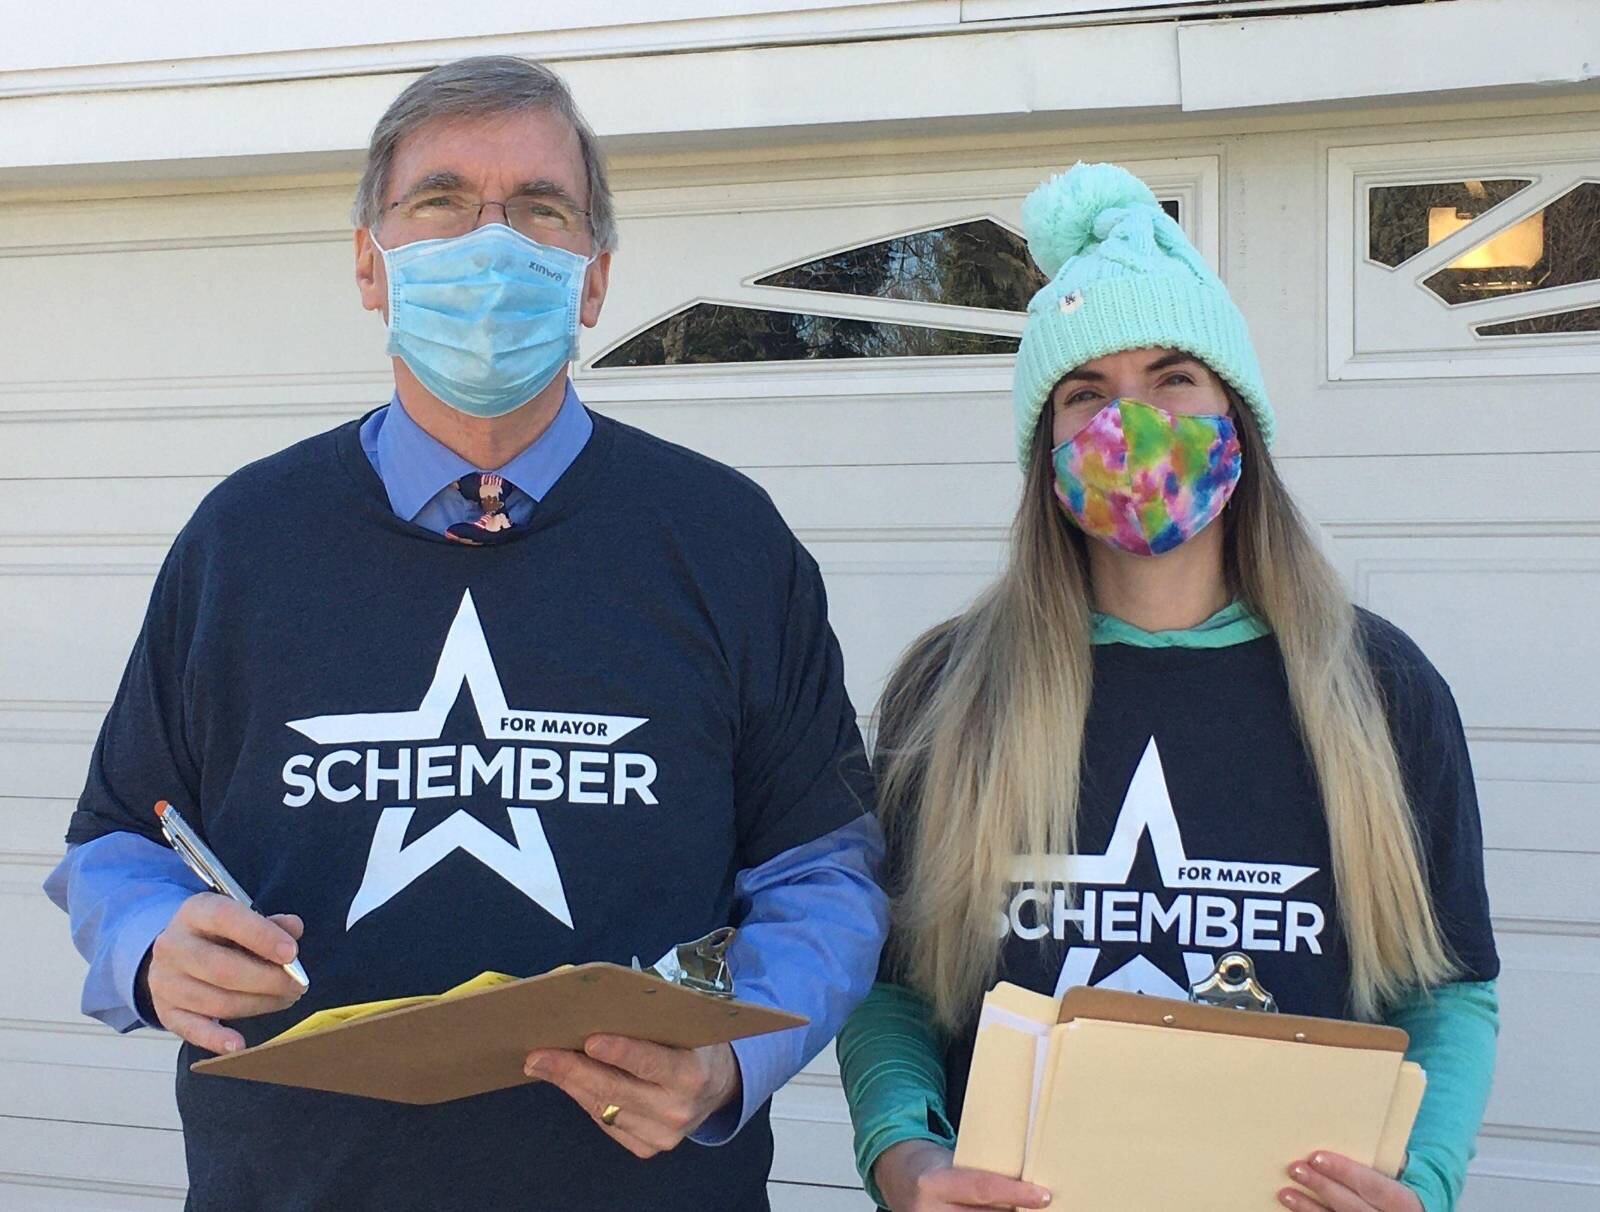  Lend a hand   Volunteer Today    Join #teamschember  